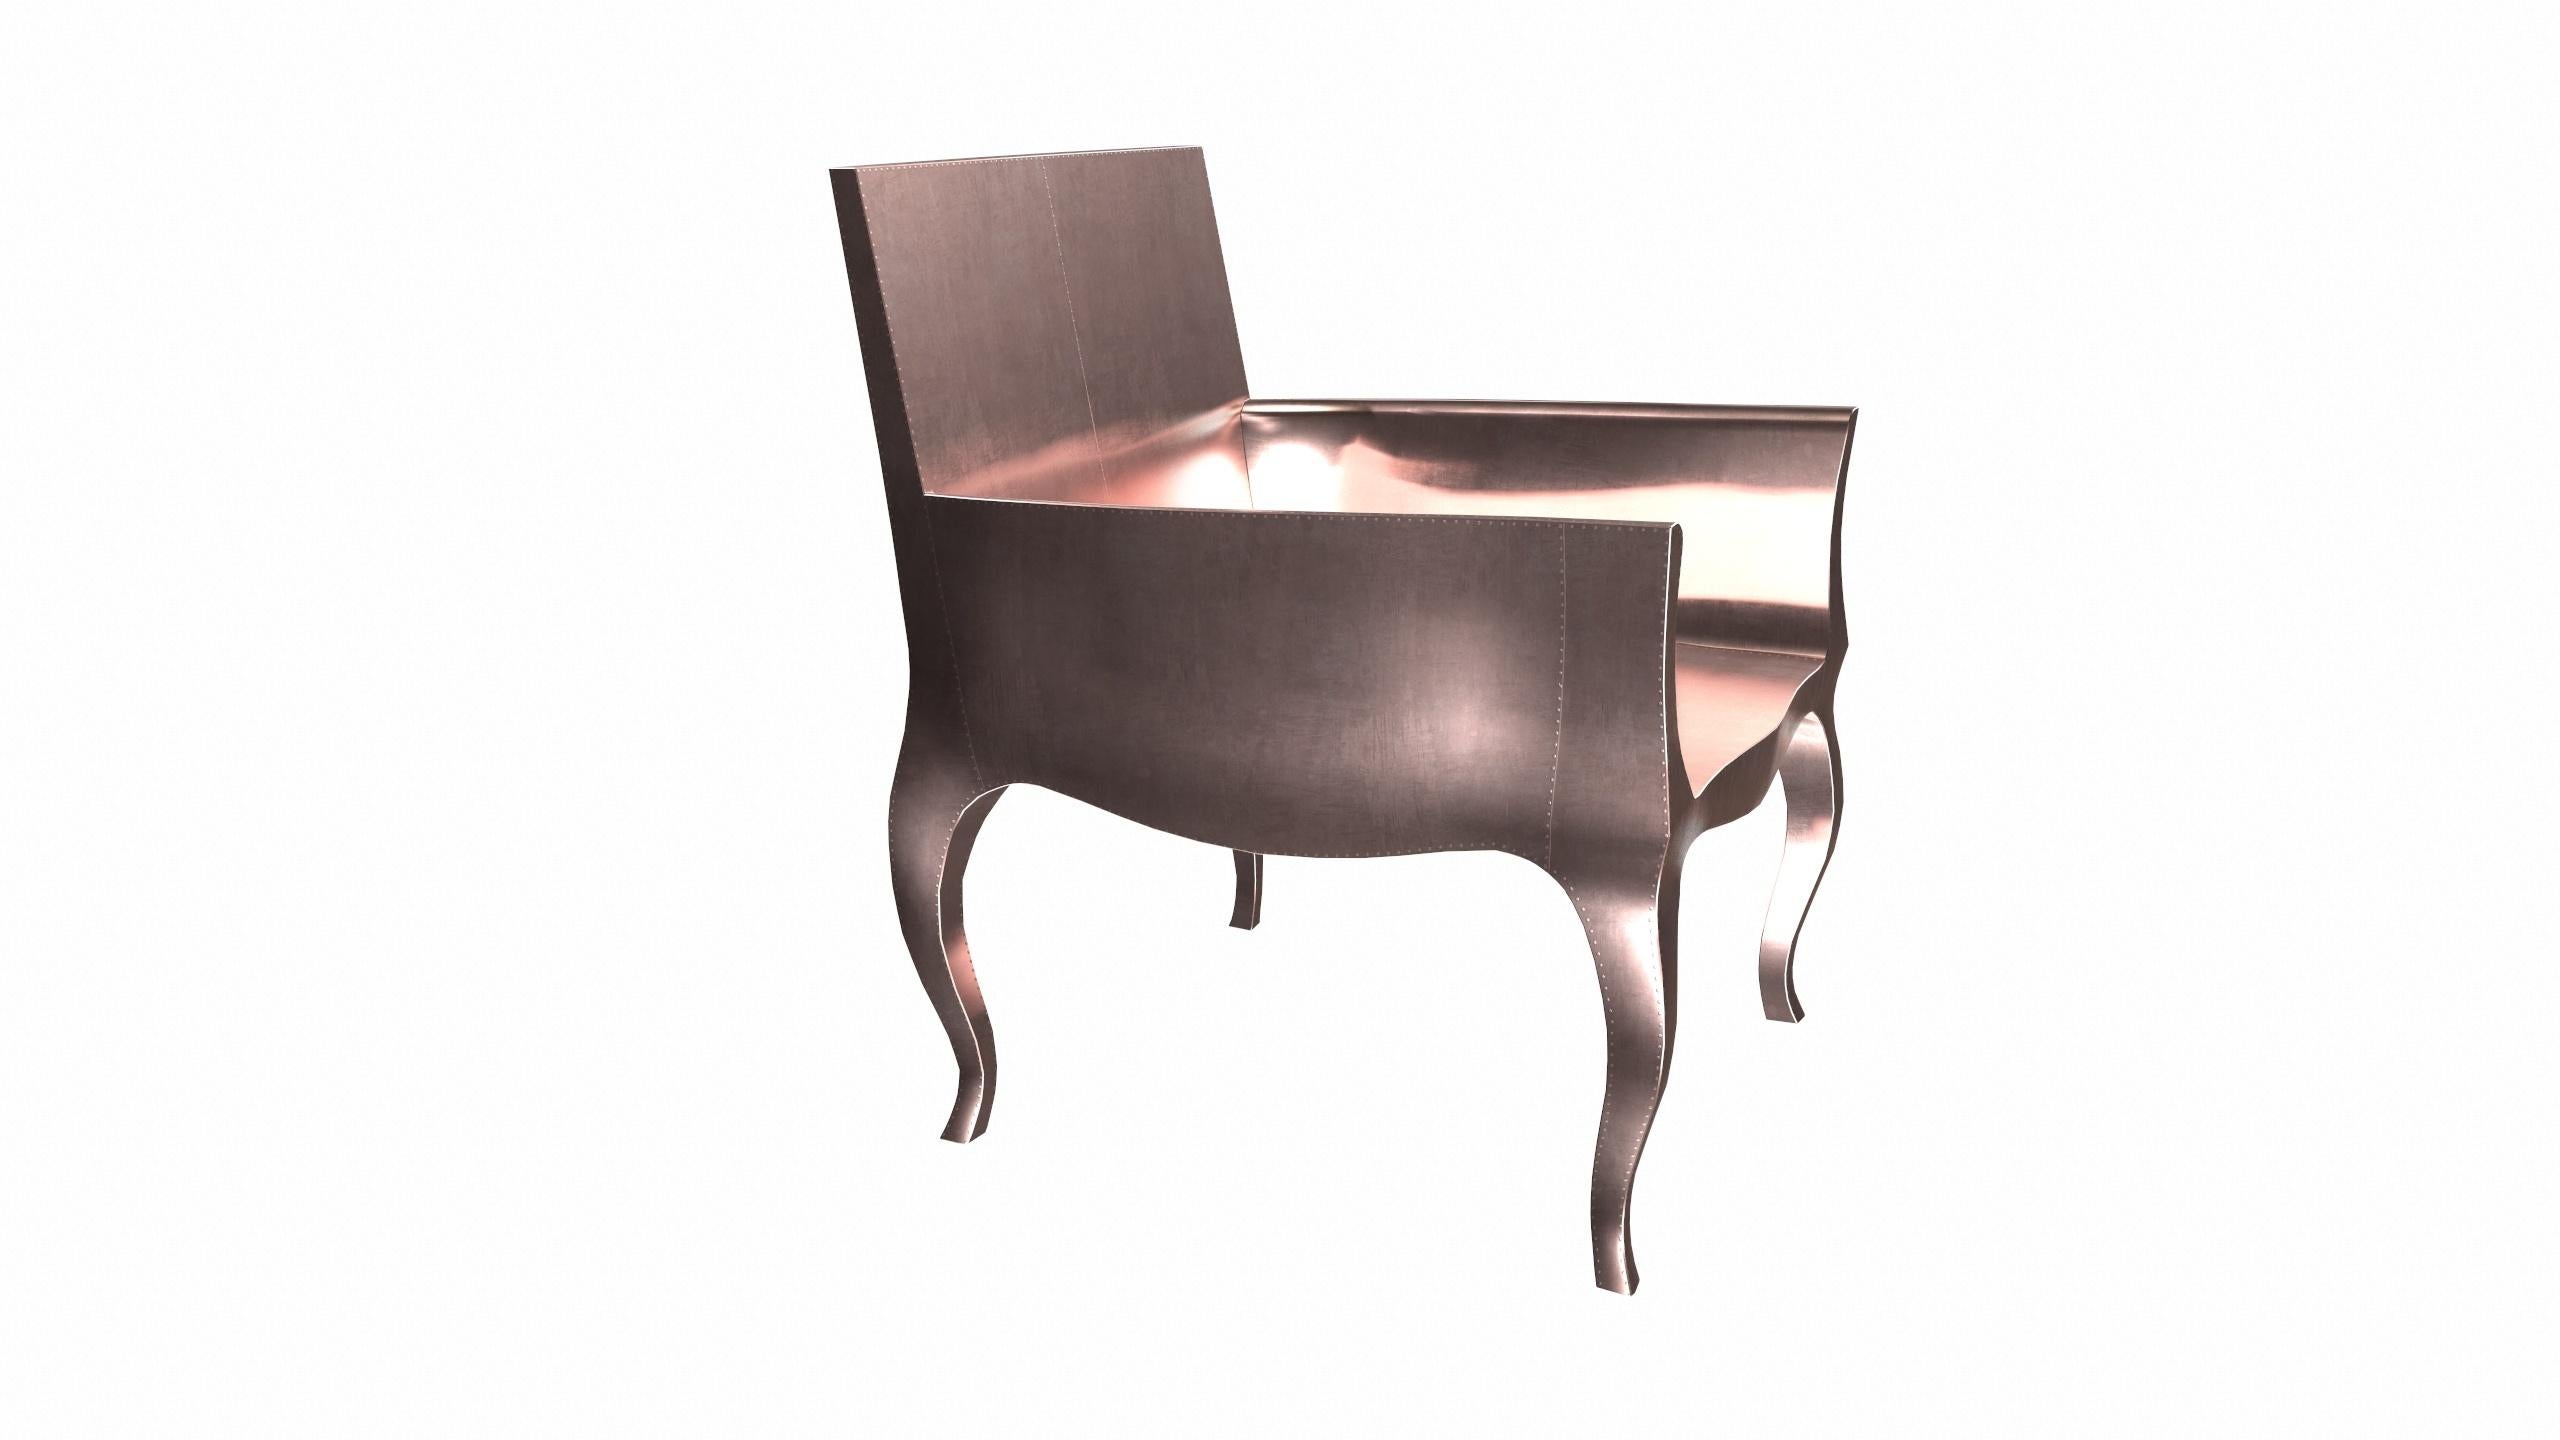 Hand-Carved Art Deco Club Chairs in Smooth Copper by Paul Mathieu for S. Odegard For Sale